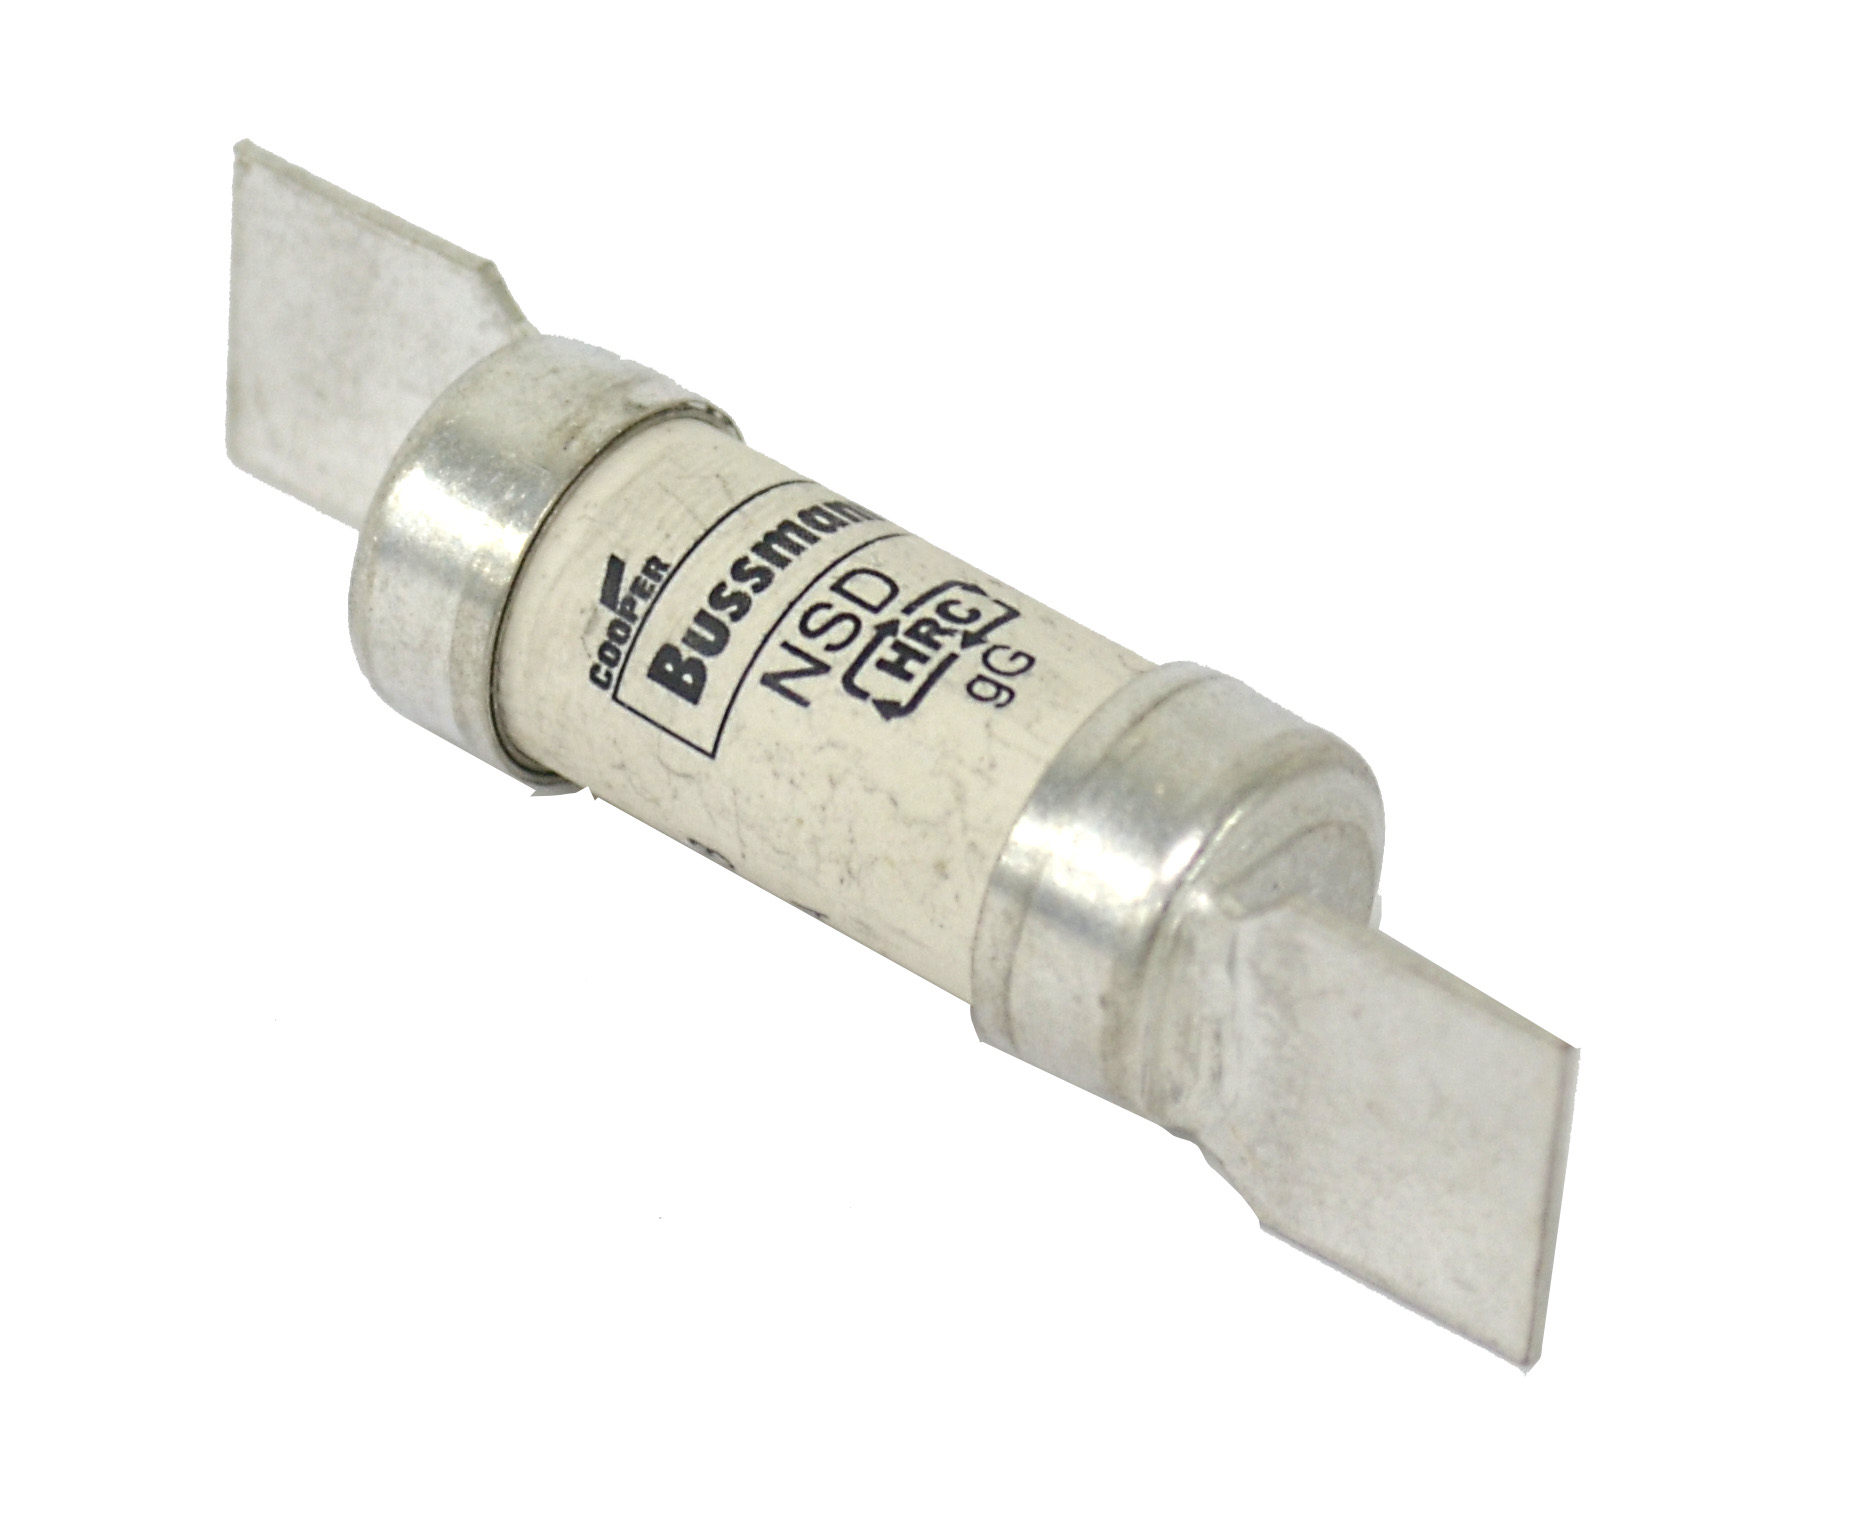 Fuseco Fuse Link 6A C/I/F/L W/L 1.80 | Middy's Electrical